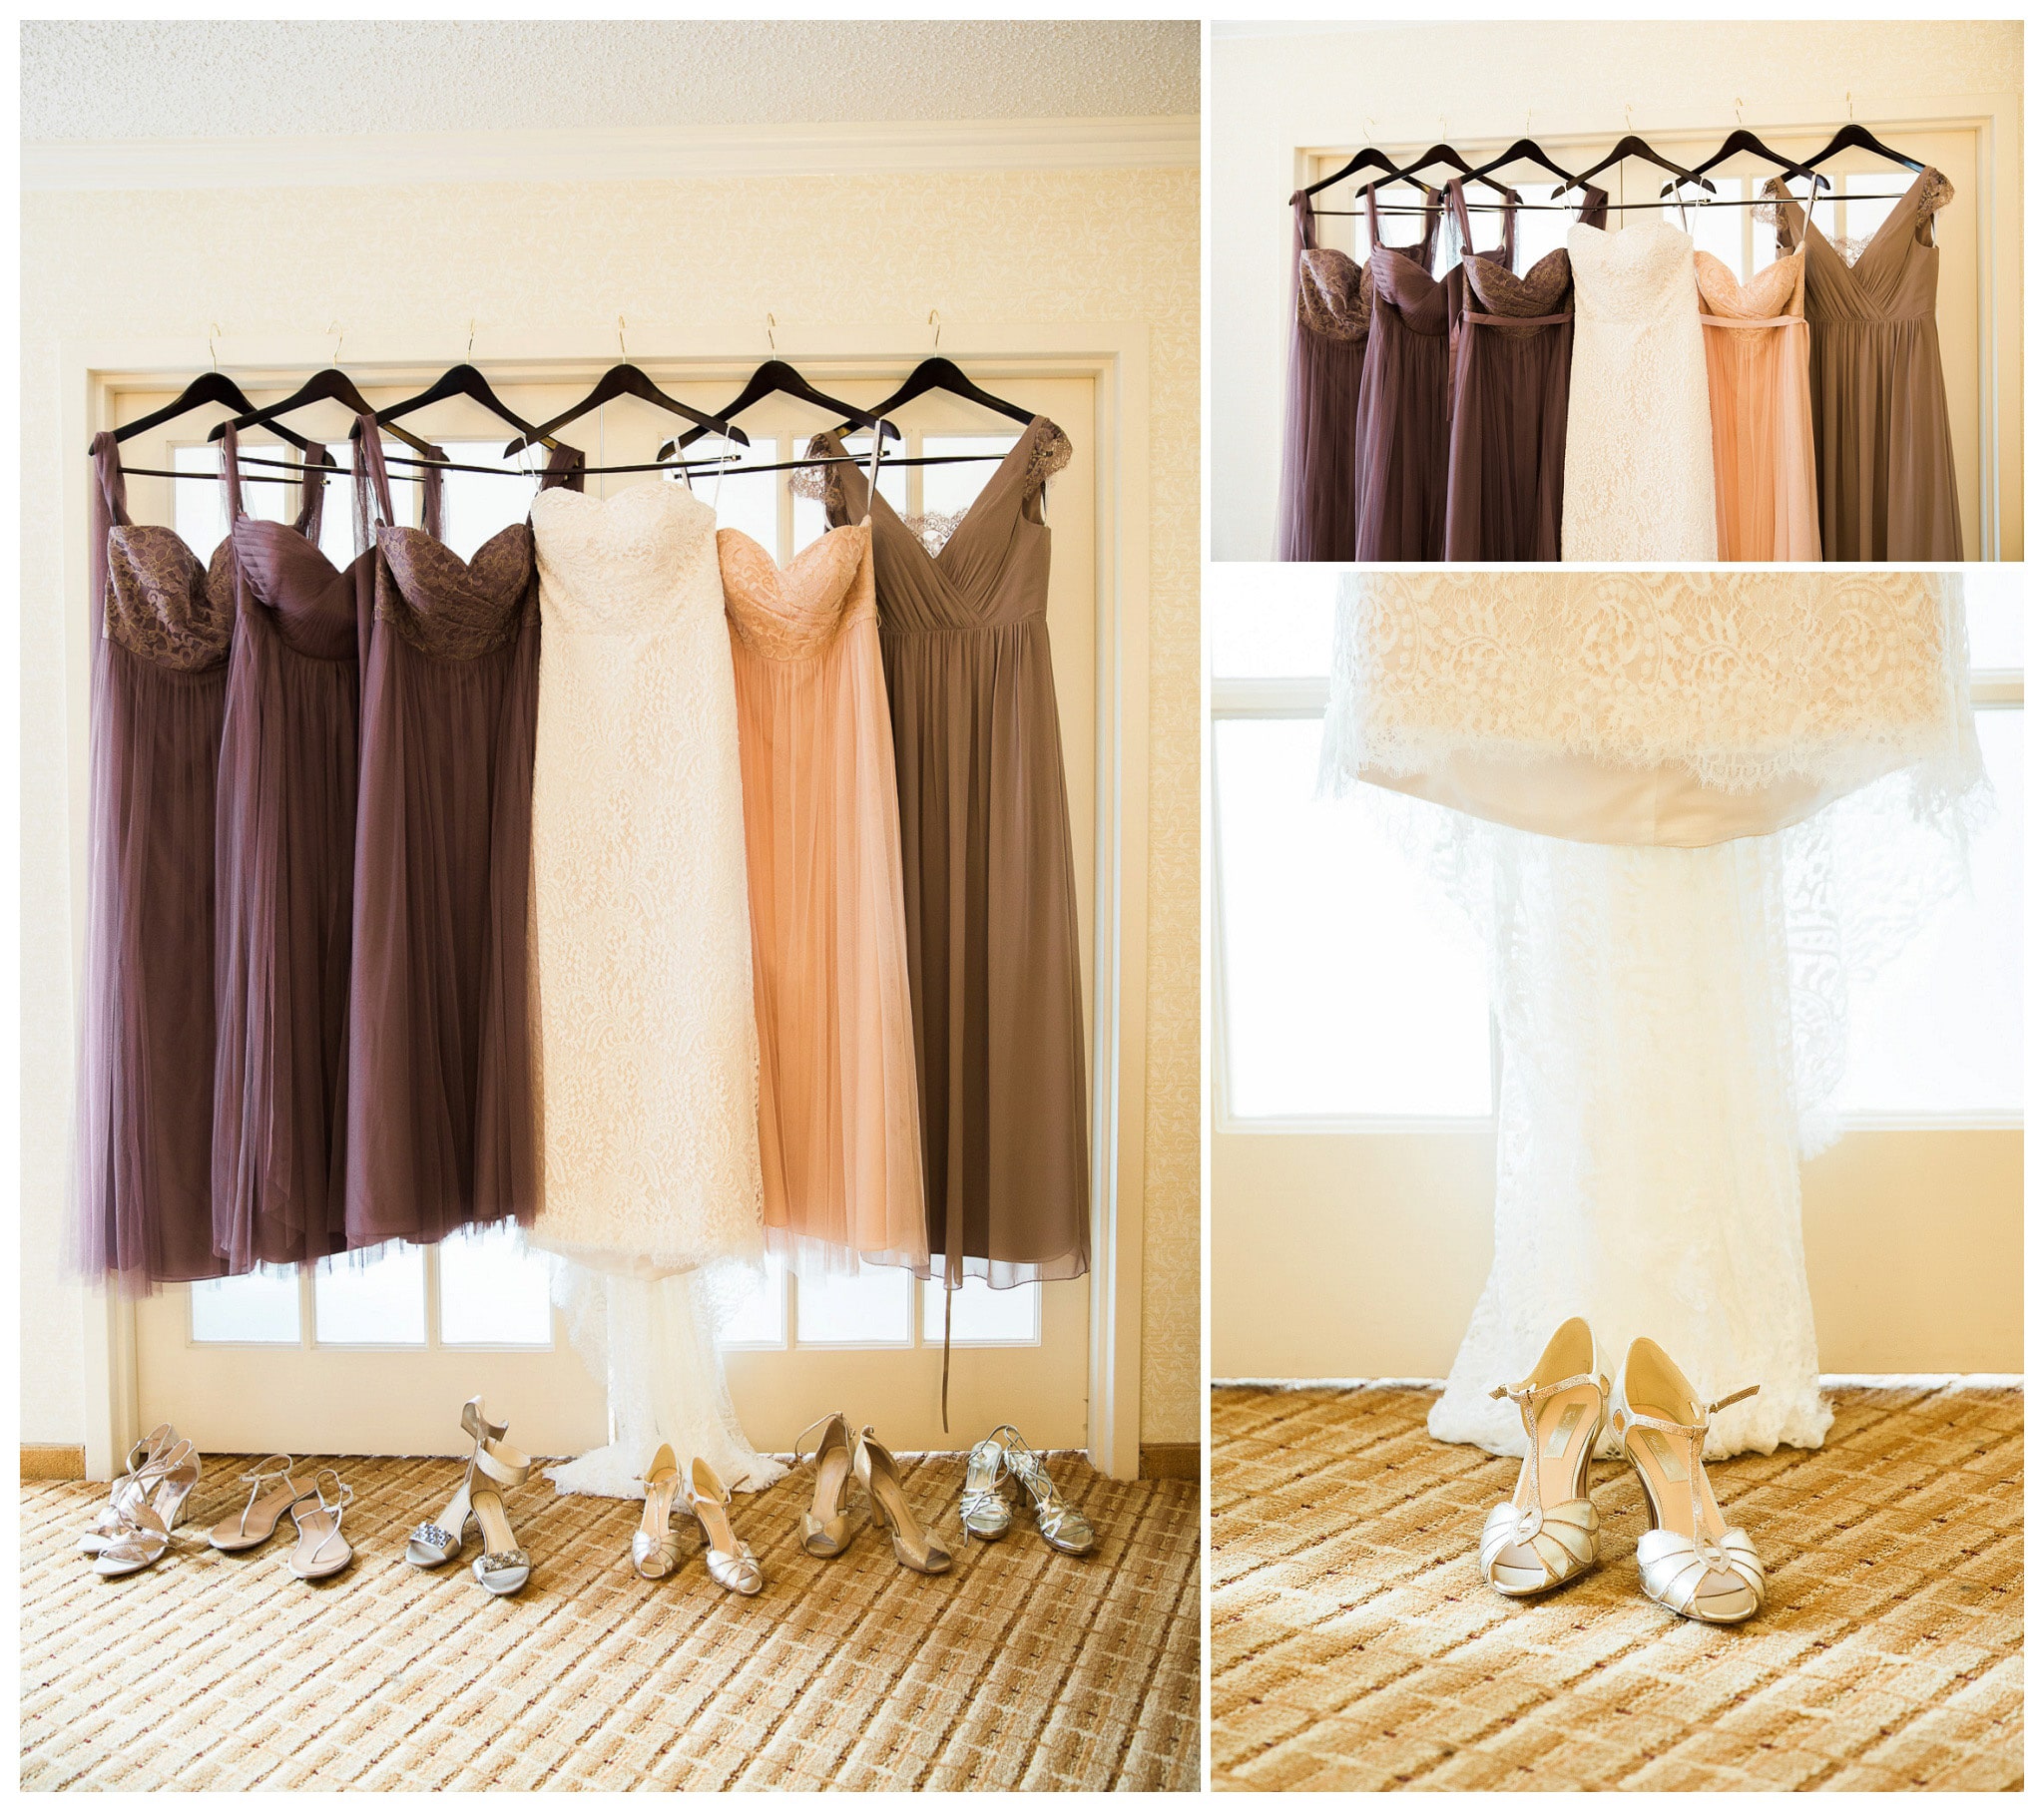 All the wedding dresses, A Beautiful Collection hanging with their shoes, Venue and Catering – King plow Event Gallery and Bold American Events Decor and flowers – Stylish Stems Music and Band – Seven Sharp Nine Transportation – Georgia Trolley Photographer One Life Photography